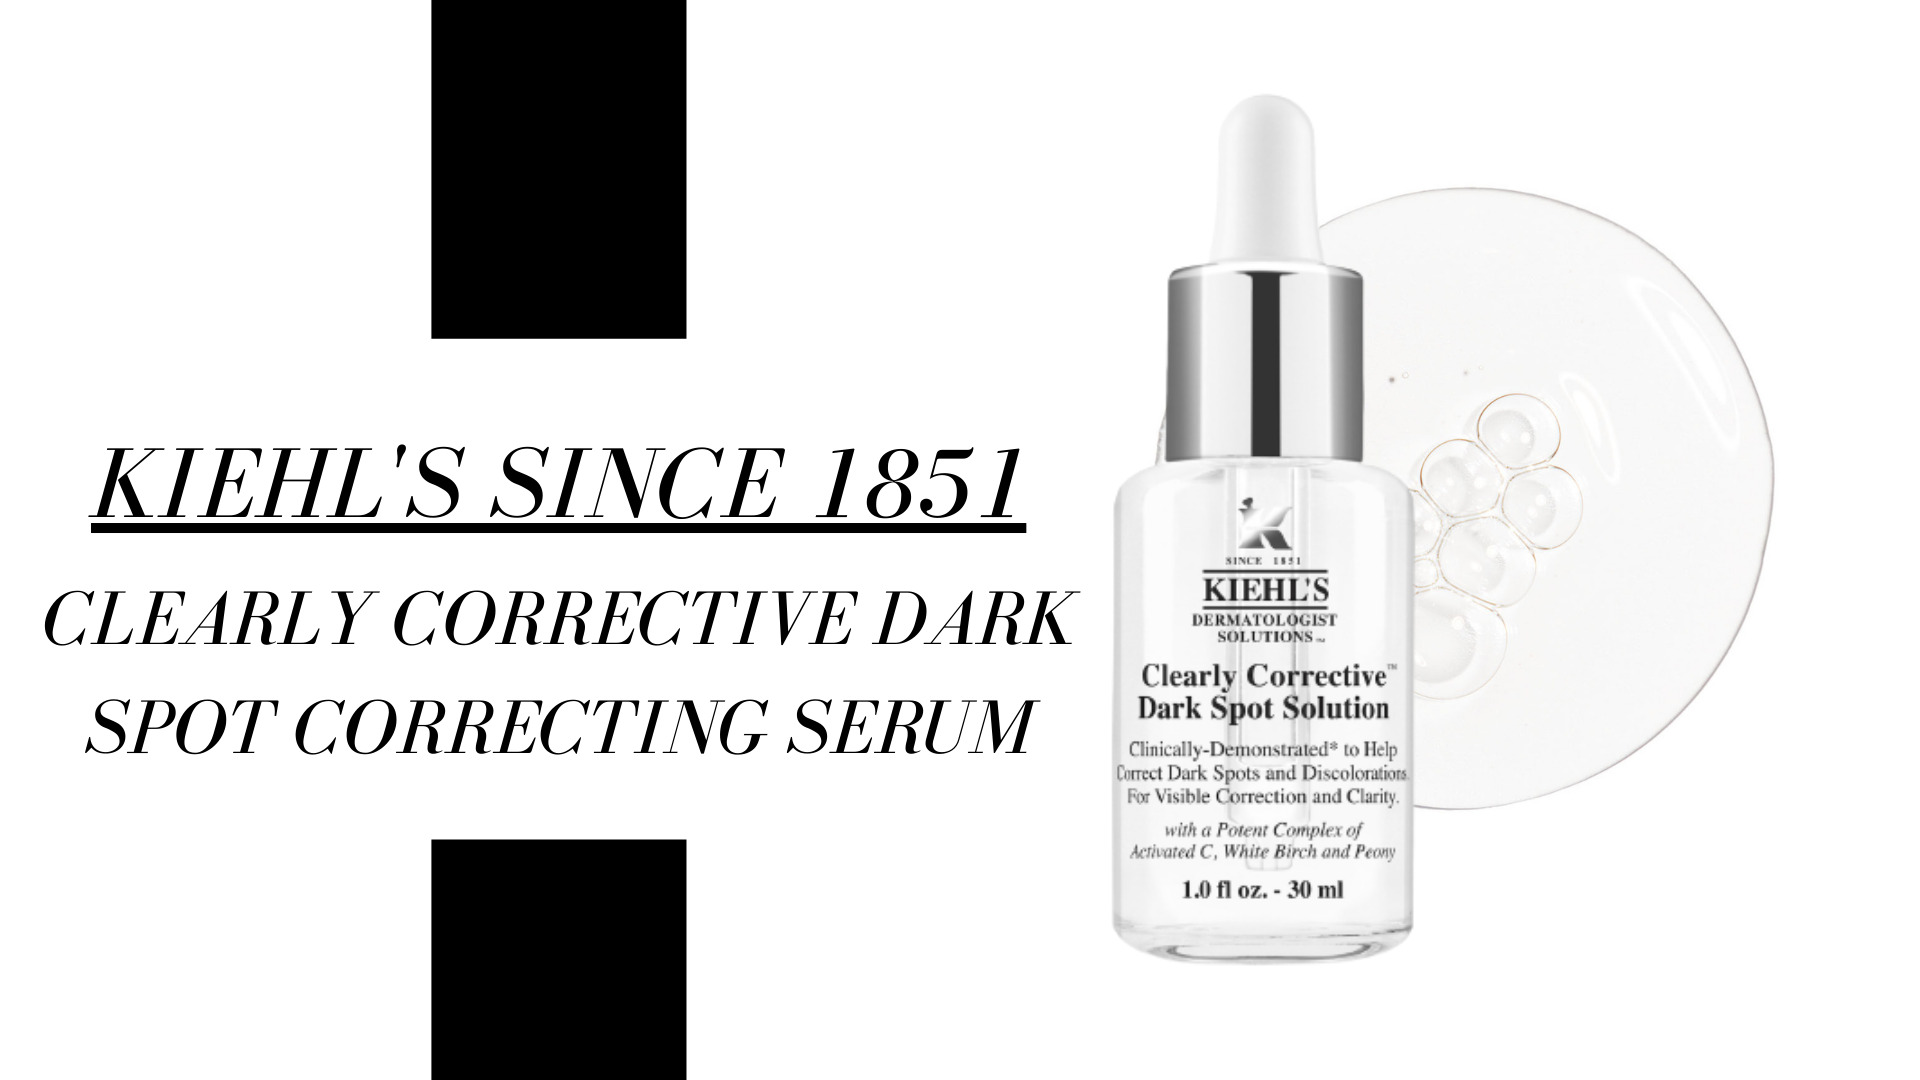 Another great serum is this one from Kiehl's. It is ideal for normal, dry, combination, and oily skin, which is always nice. This lightweight brightening face serum is formulated with a potent form of vitamin C, salicylic acid, and peony extract to help visibly reduce hyperpigmentation, dark spots, and post-acne marks.